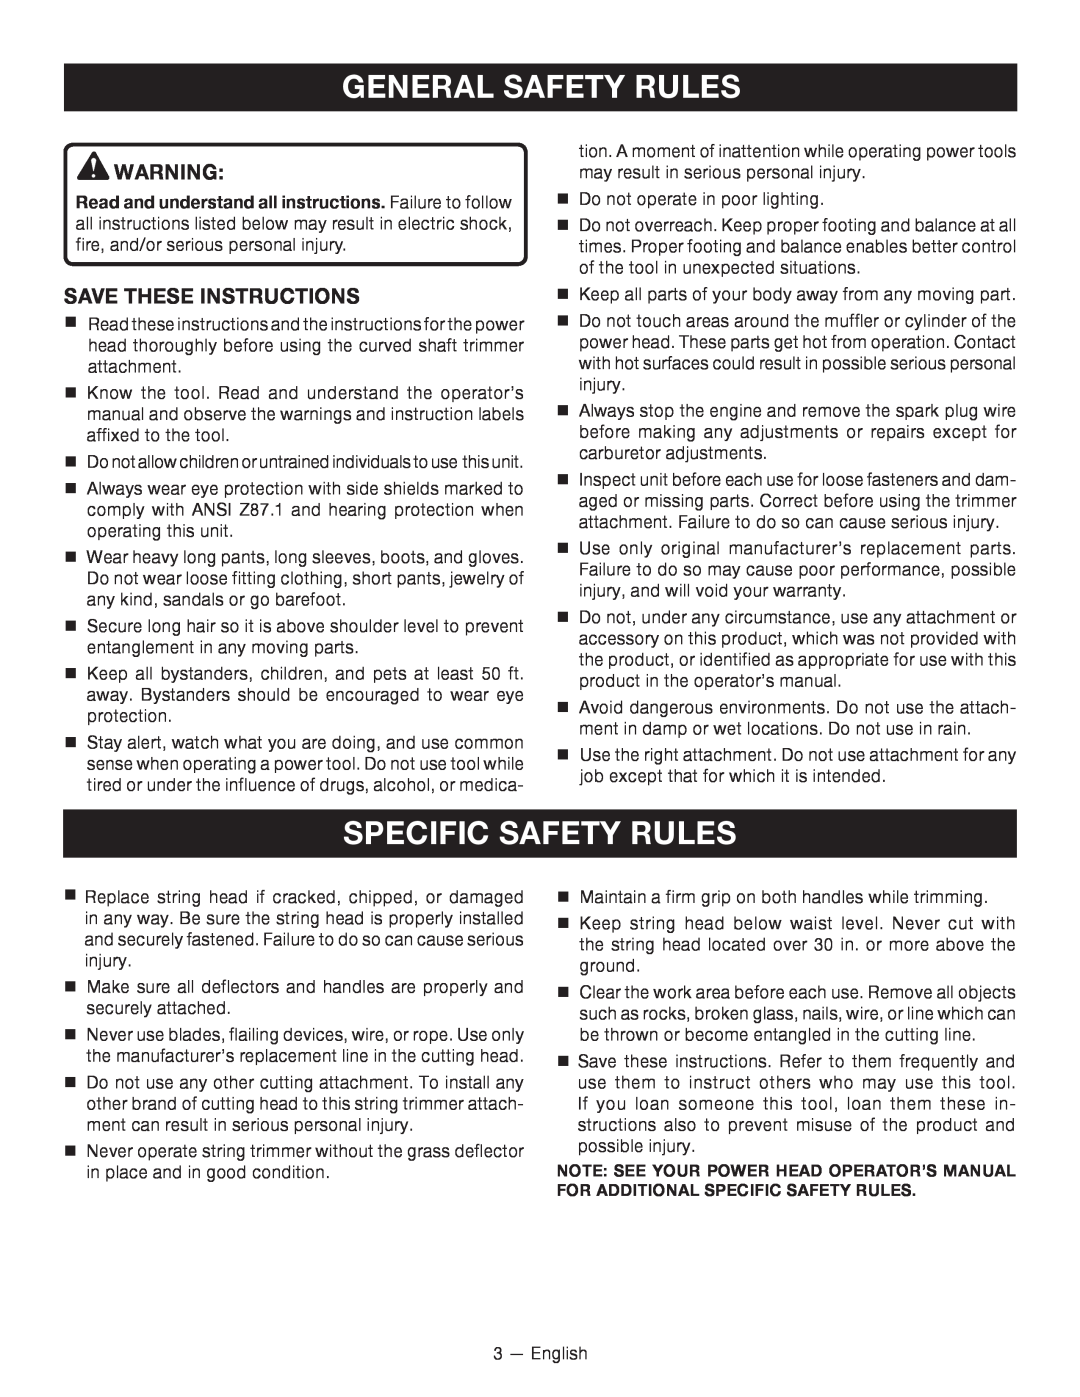 Ryobi RY15525 manuel dutilisation General Safety Rules, Specific Safety Rules, Save These Instructions 